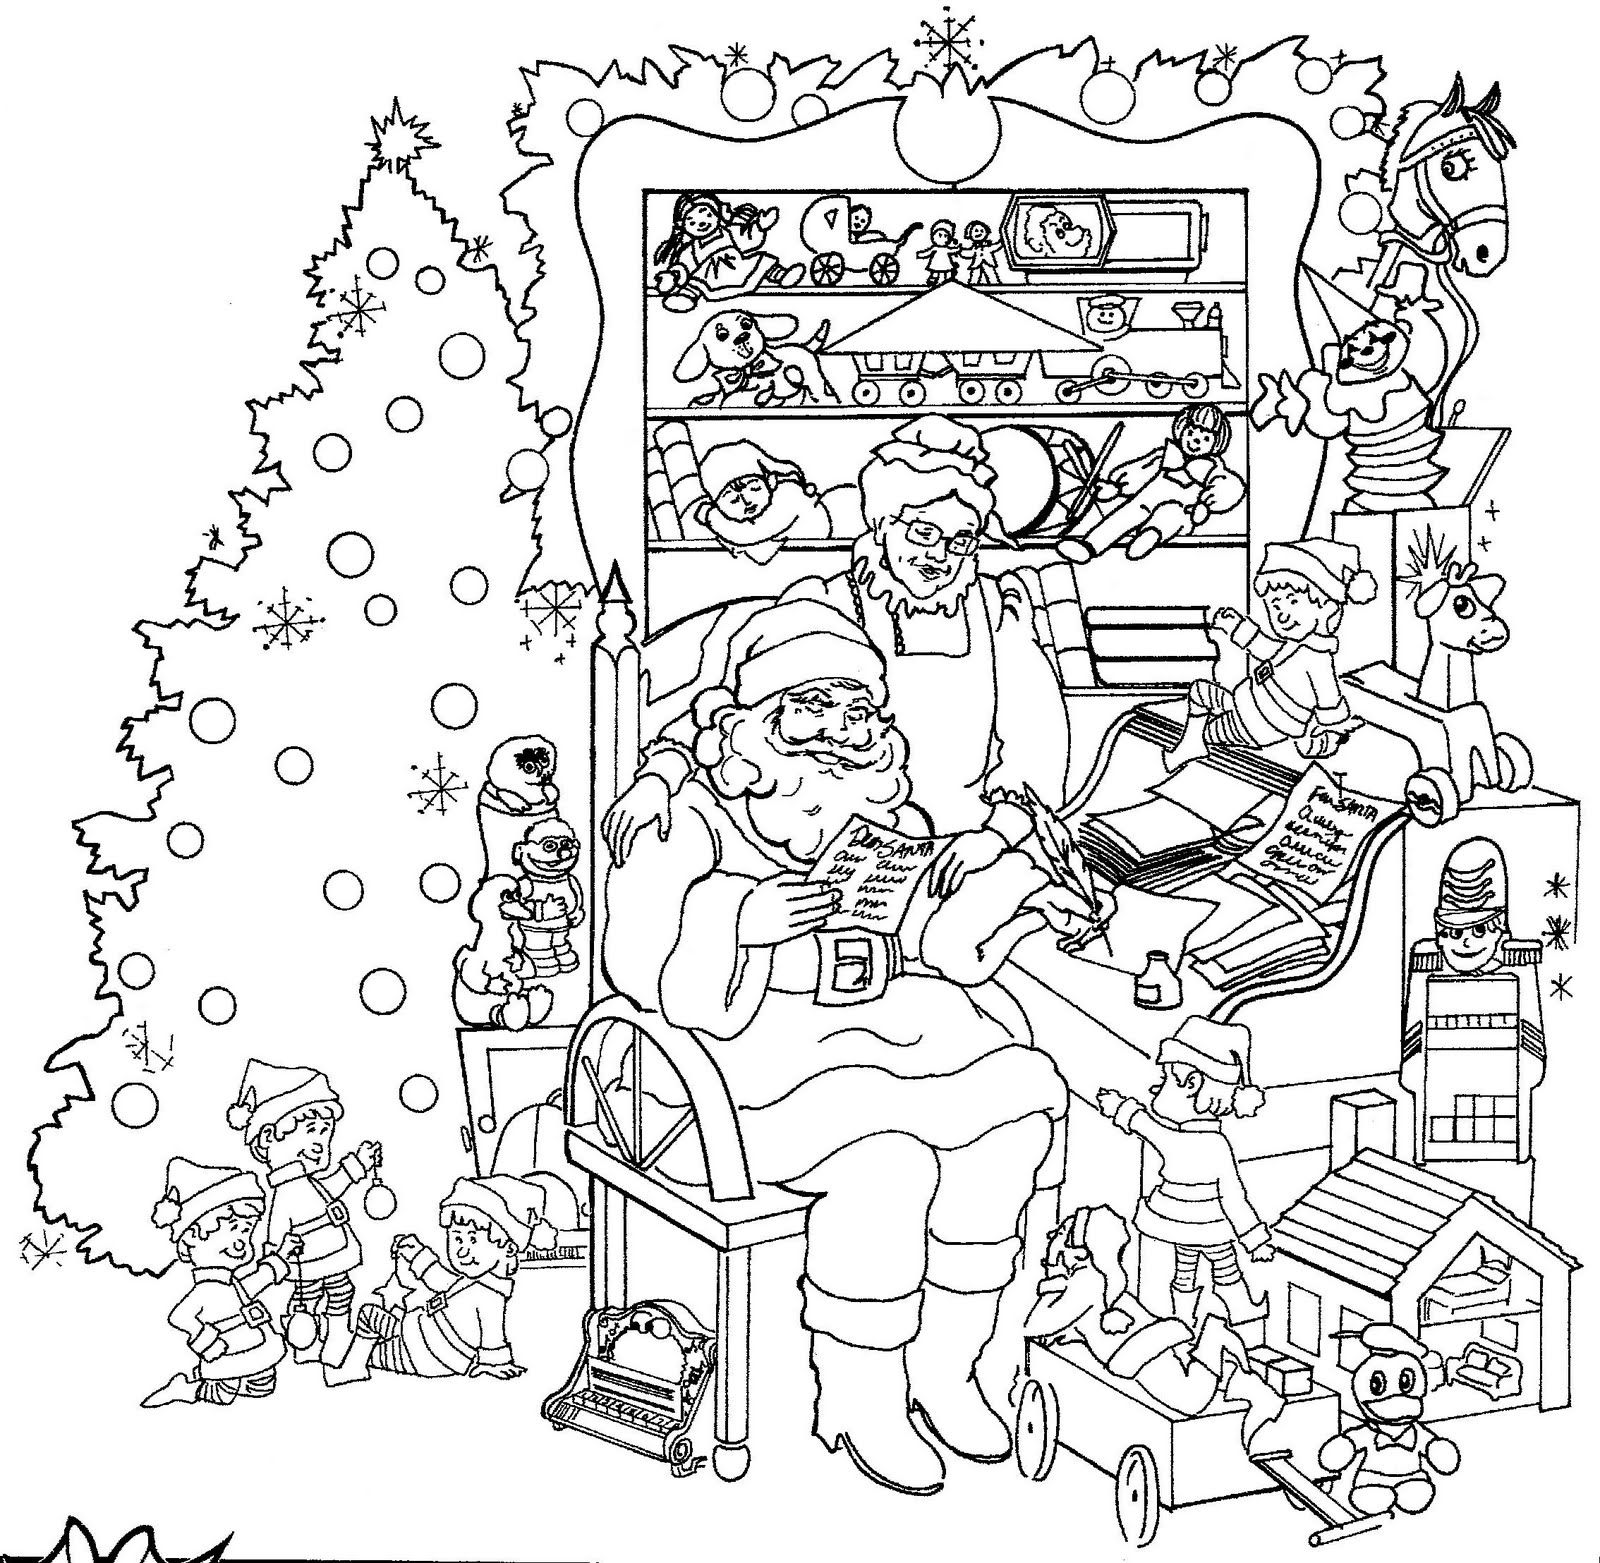 Christmas Coloring Page Pdf   Ð¡oloring Pages For All Ages ...